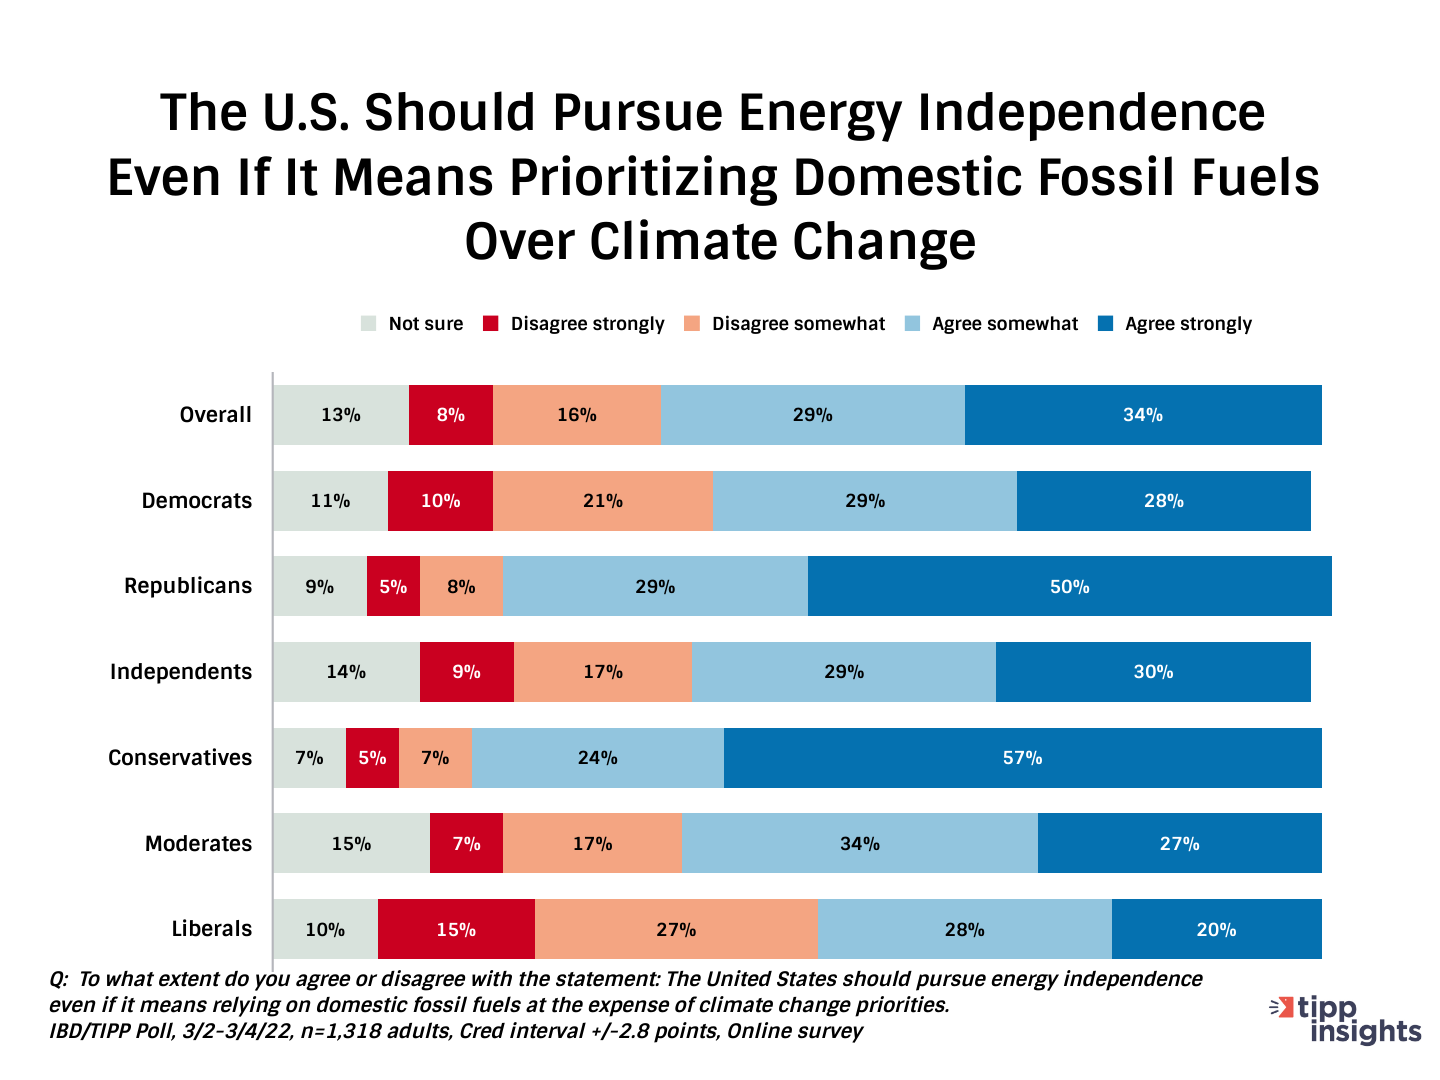 U.S. should favor energy independence even if it means drilling over climate change